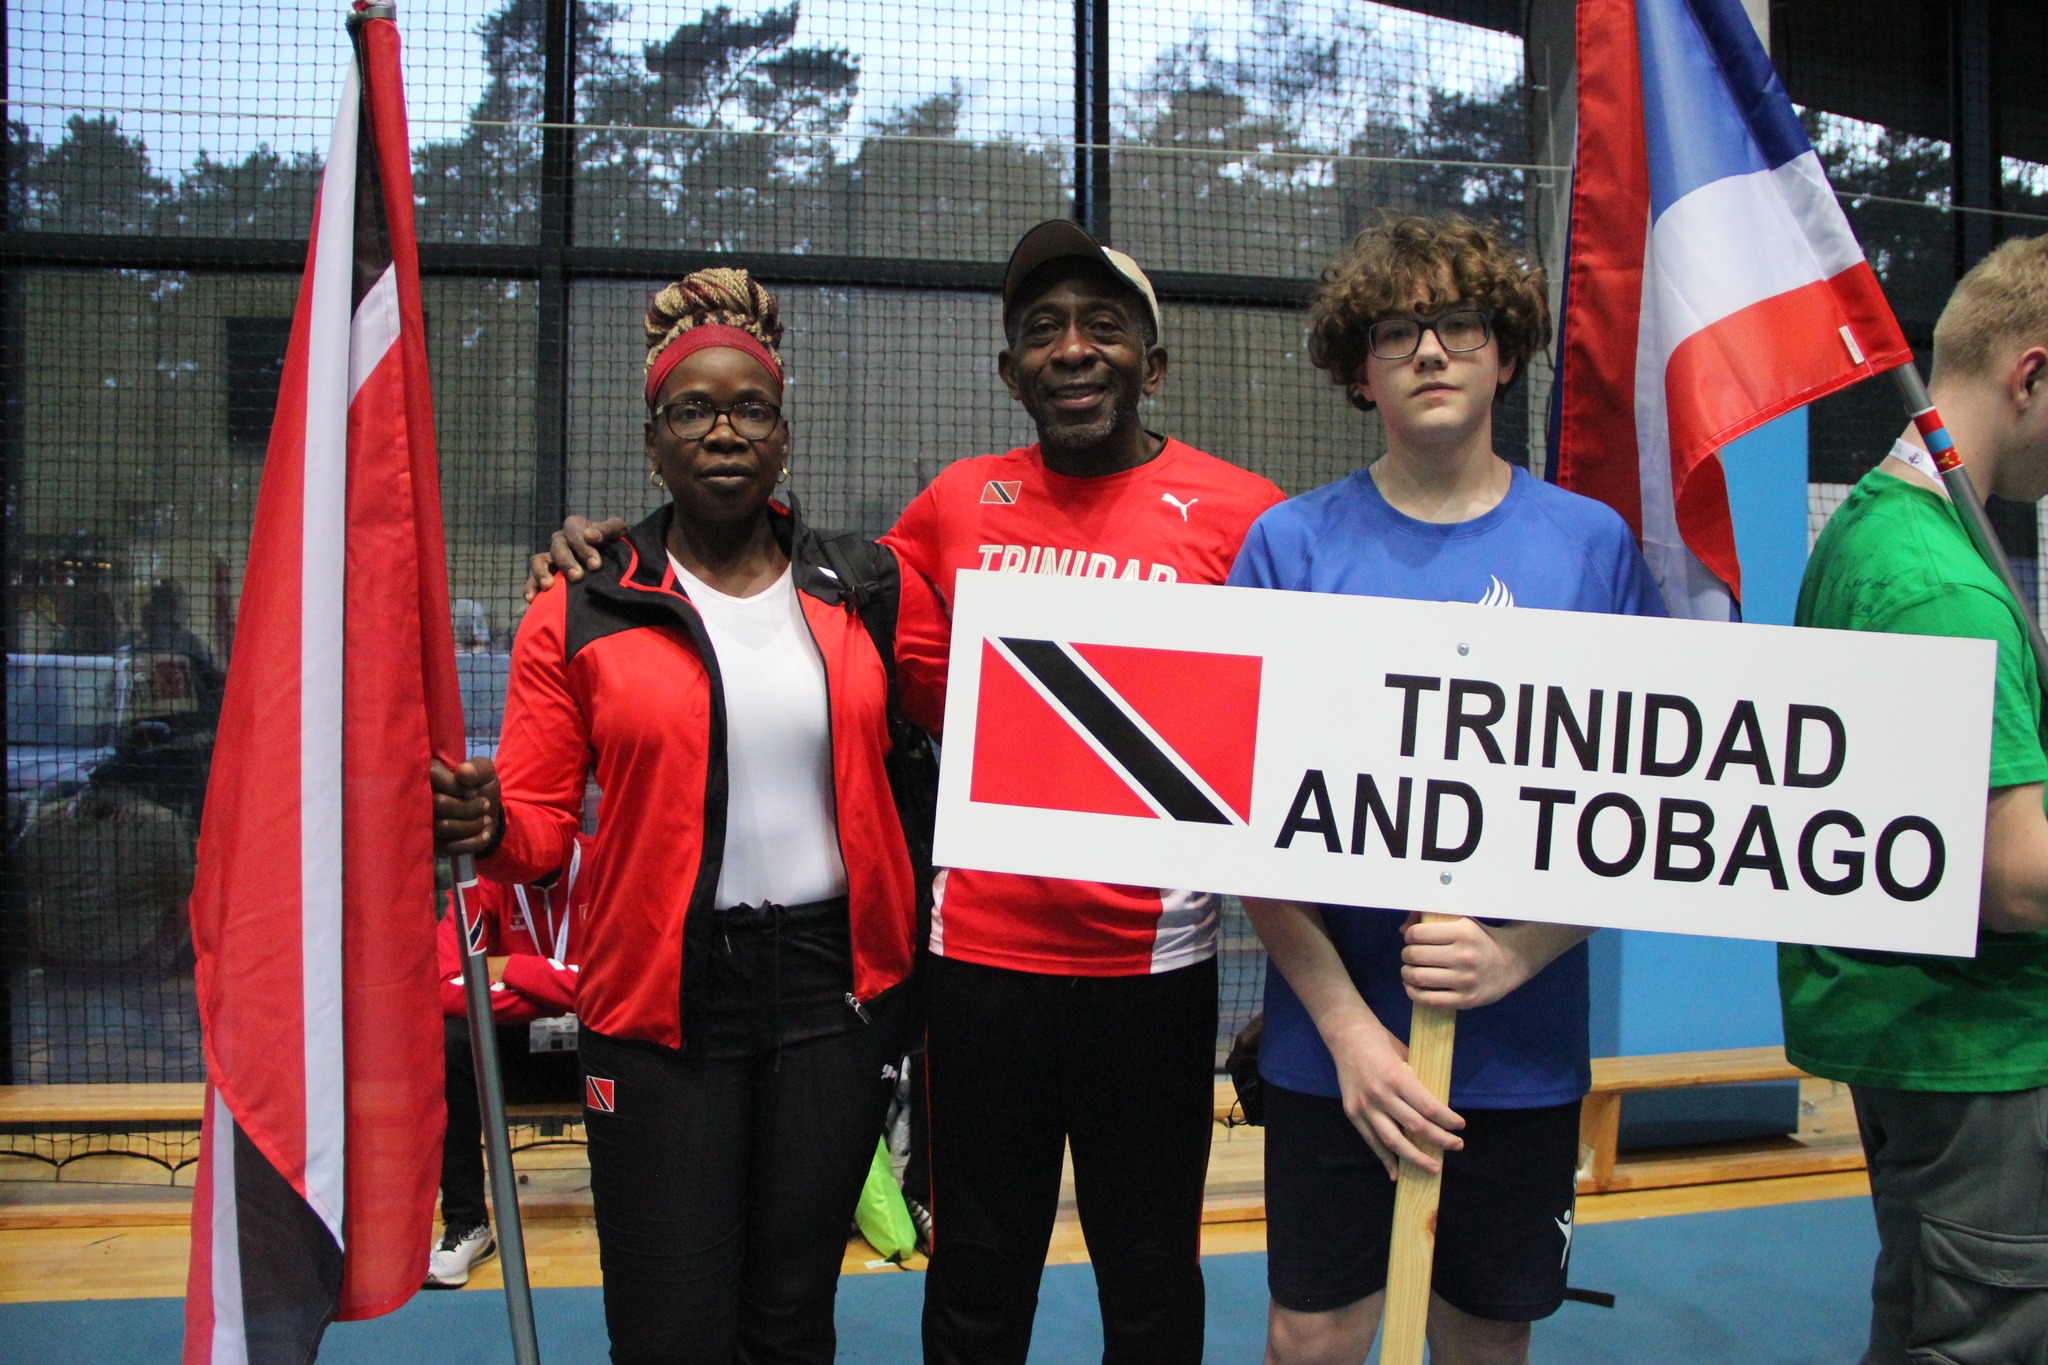 Team Trinidad and Tobago ready for Opening Ceremony. Photo by Sandy Triolo.